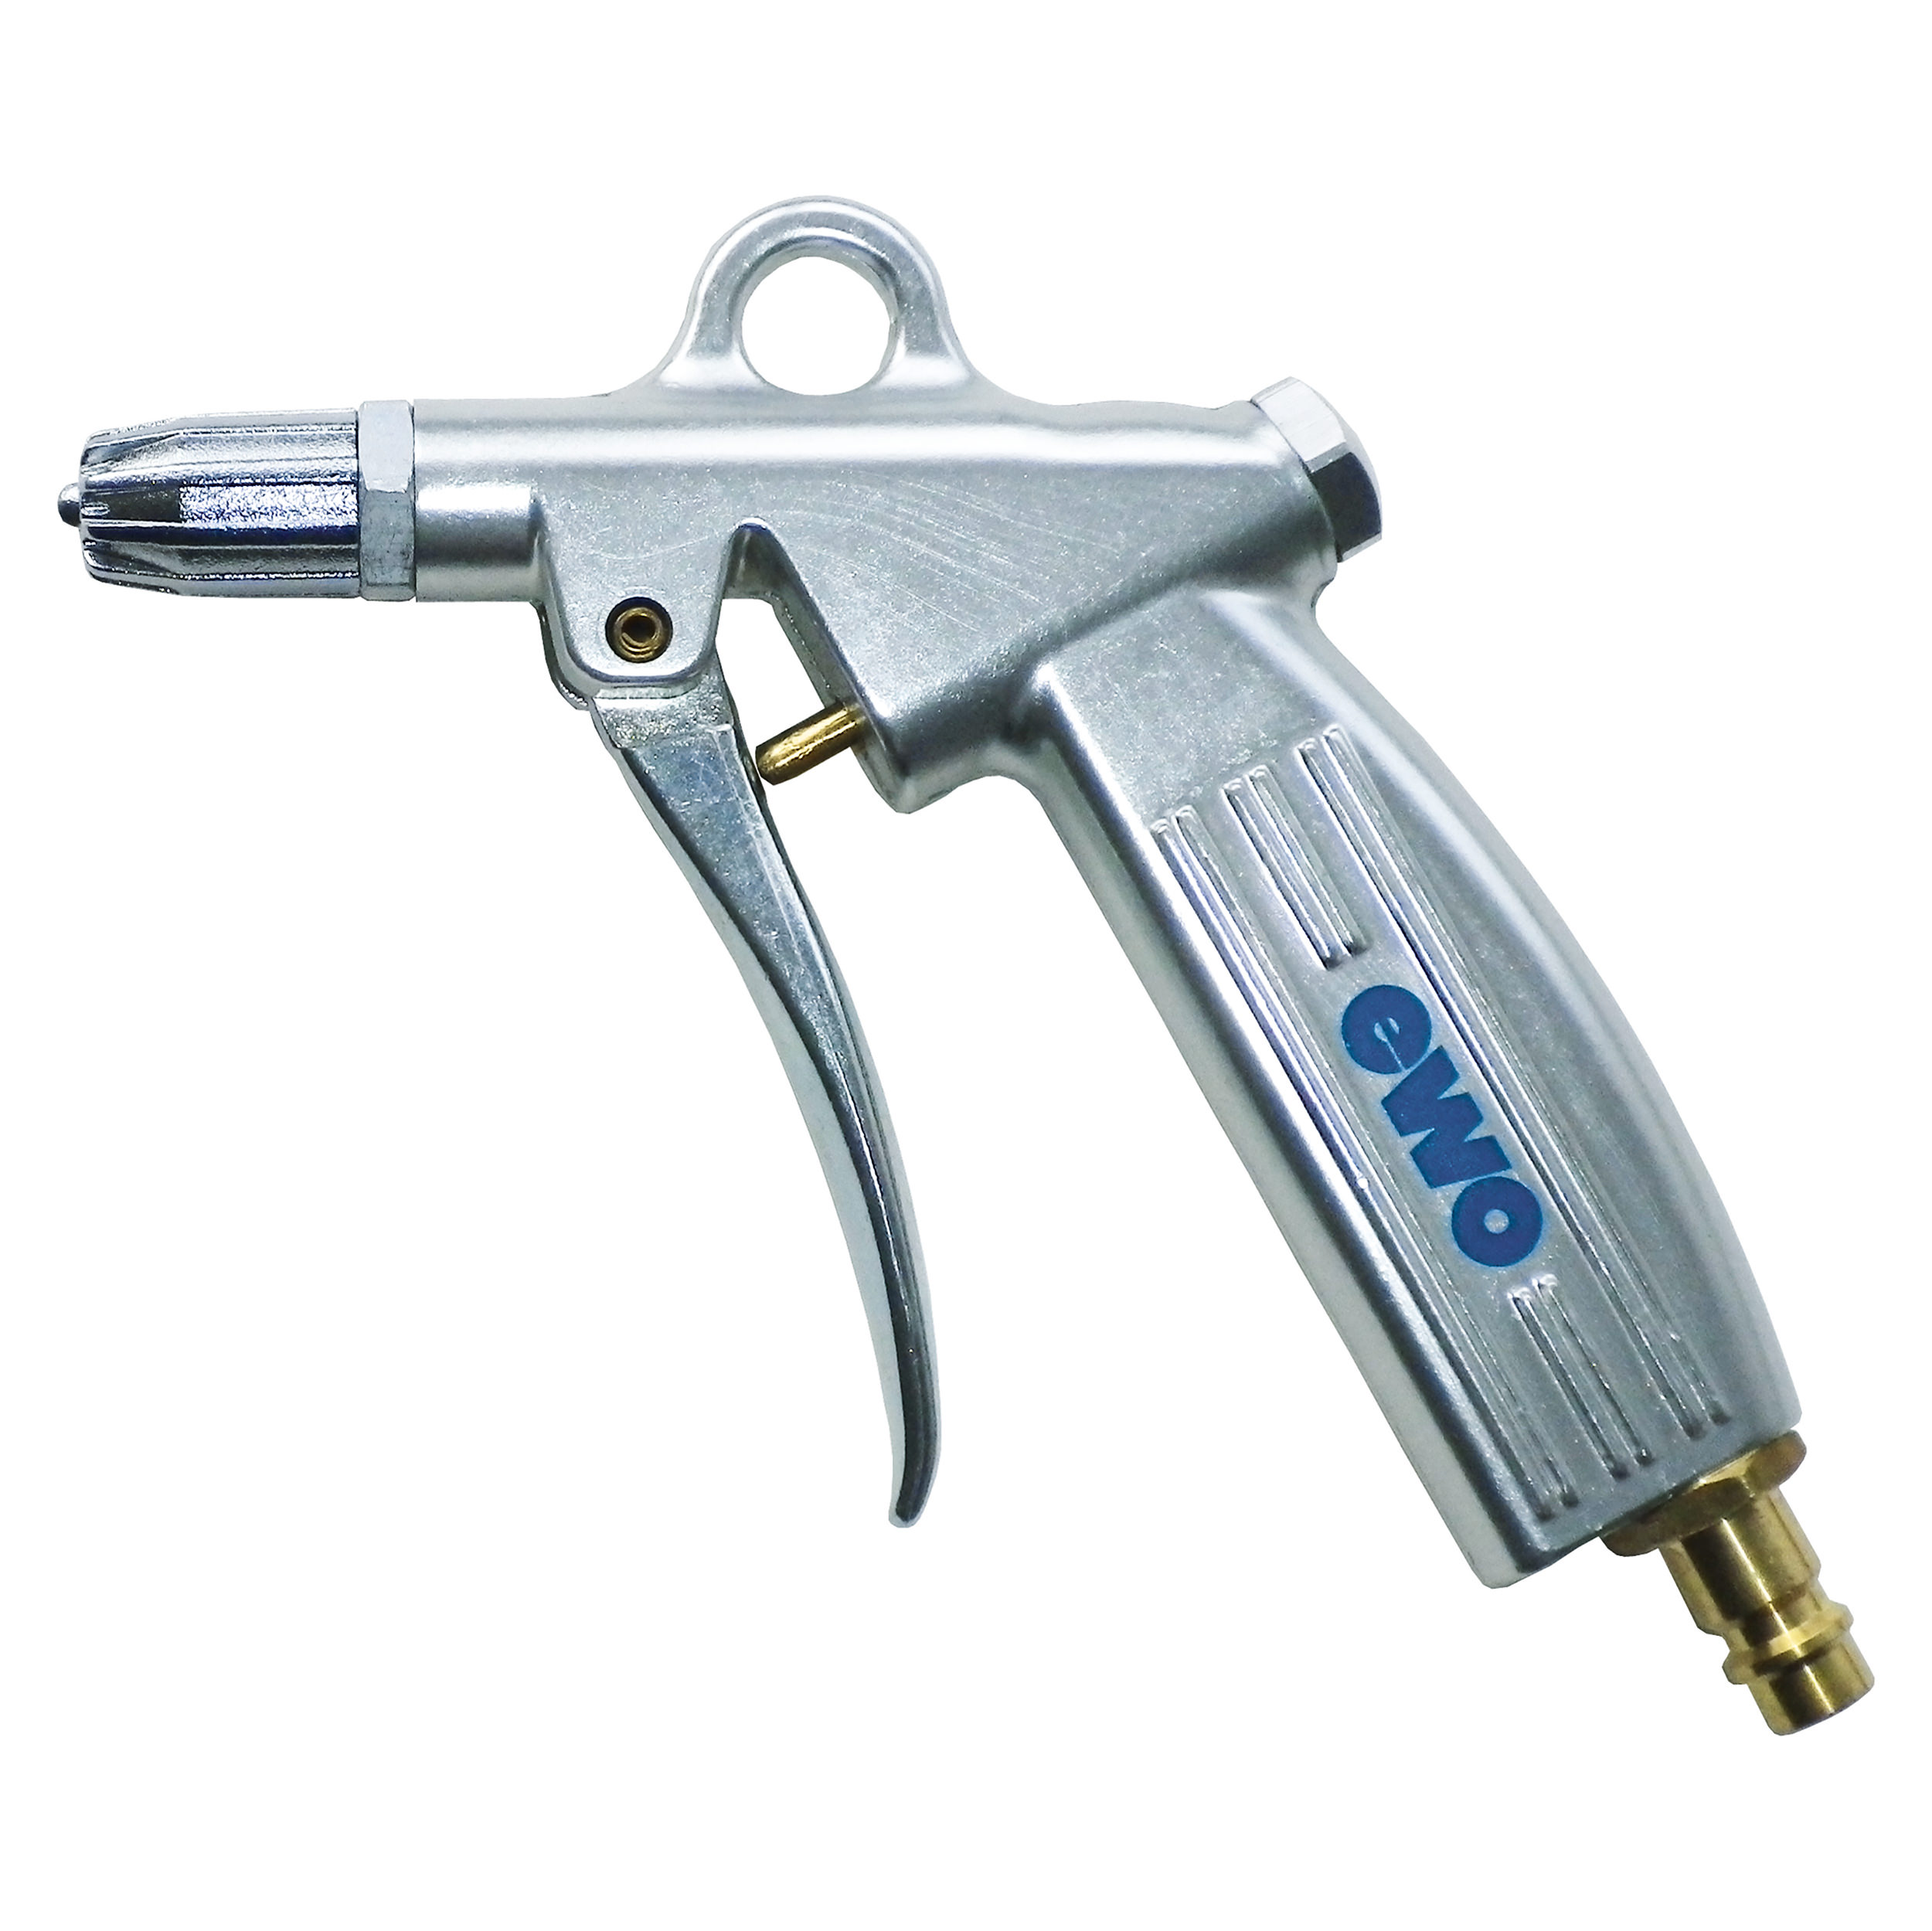 Blow gun, forged alu., safety and noise reducing noz. blowstar